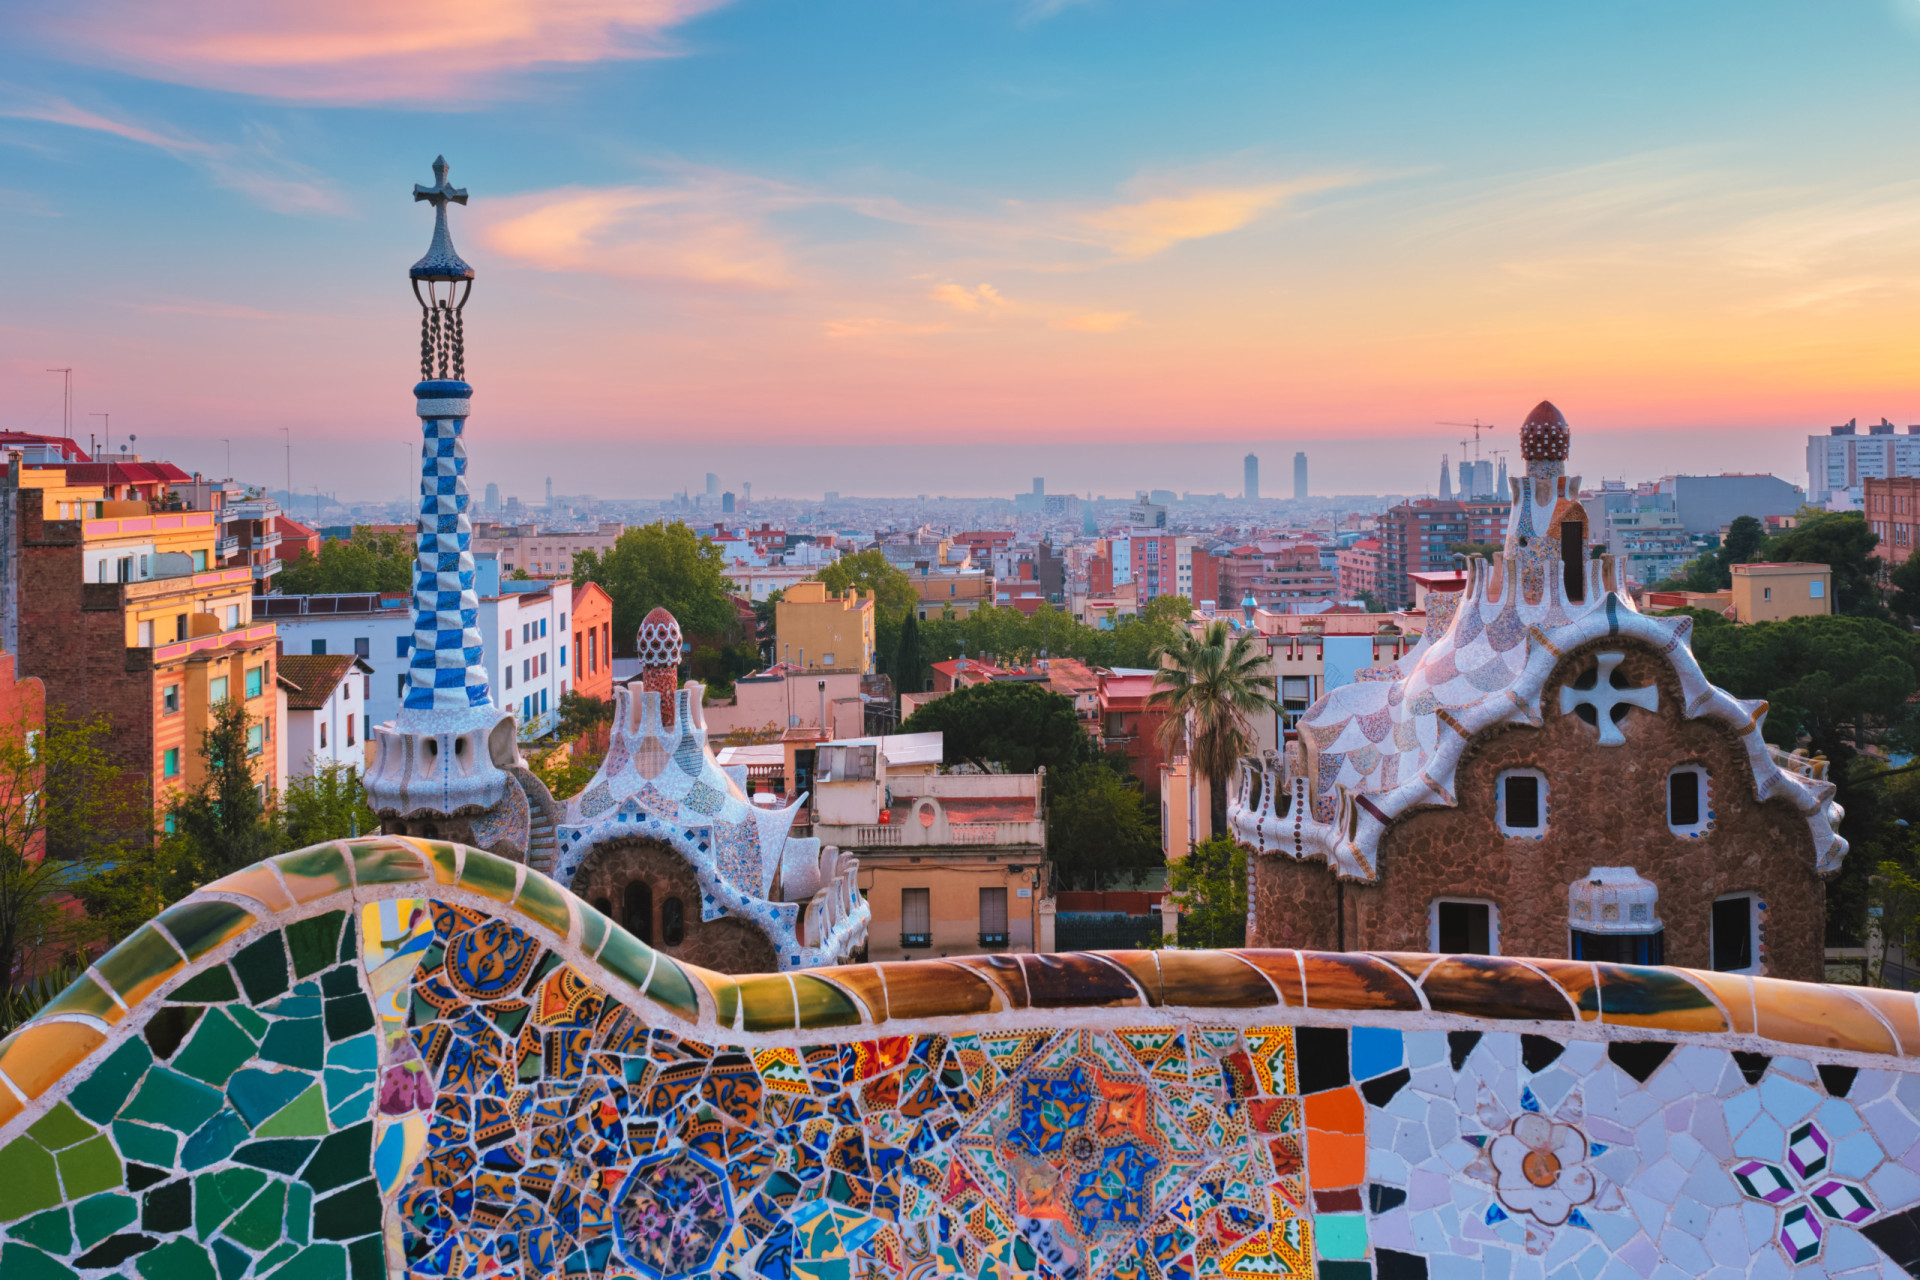 <p>Several cities in Spain have recently decided to raise the price of their tourist tax, including Barcelona, where the fee is €4 (US$4.54) per night.</p><p><a href="https://www.msn.com/en-my/community/channel/vid-7xx8mnucu55yw63we9va2gwr7uihbxwc68fxqp25x6tg4ftibpra?cvid=94631541bc0f4f89bfd59158d696ad7e">Follow us and access great exclusive content every day</a></p>